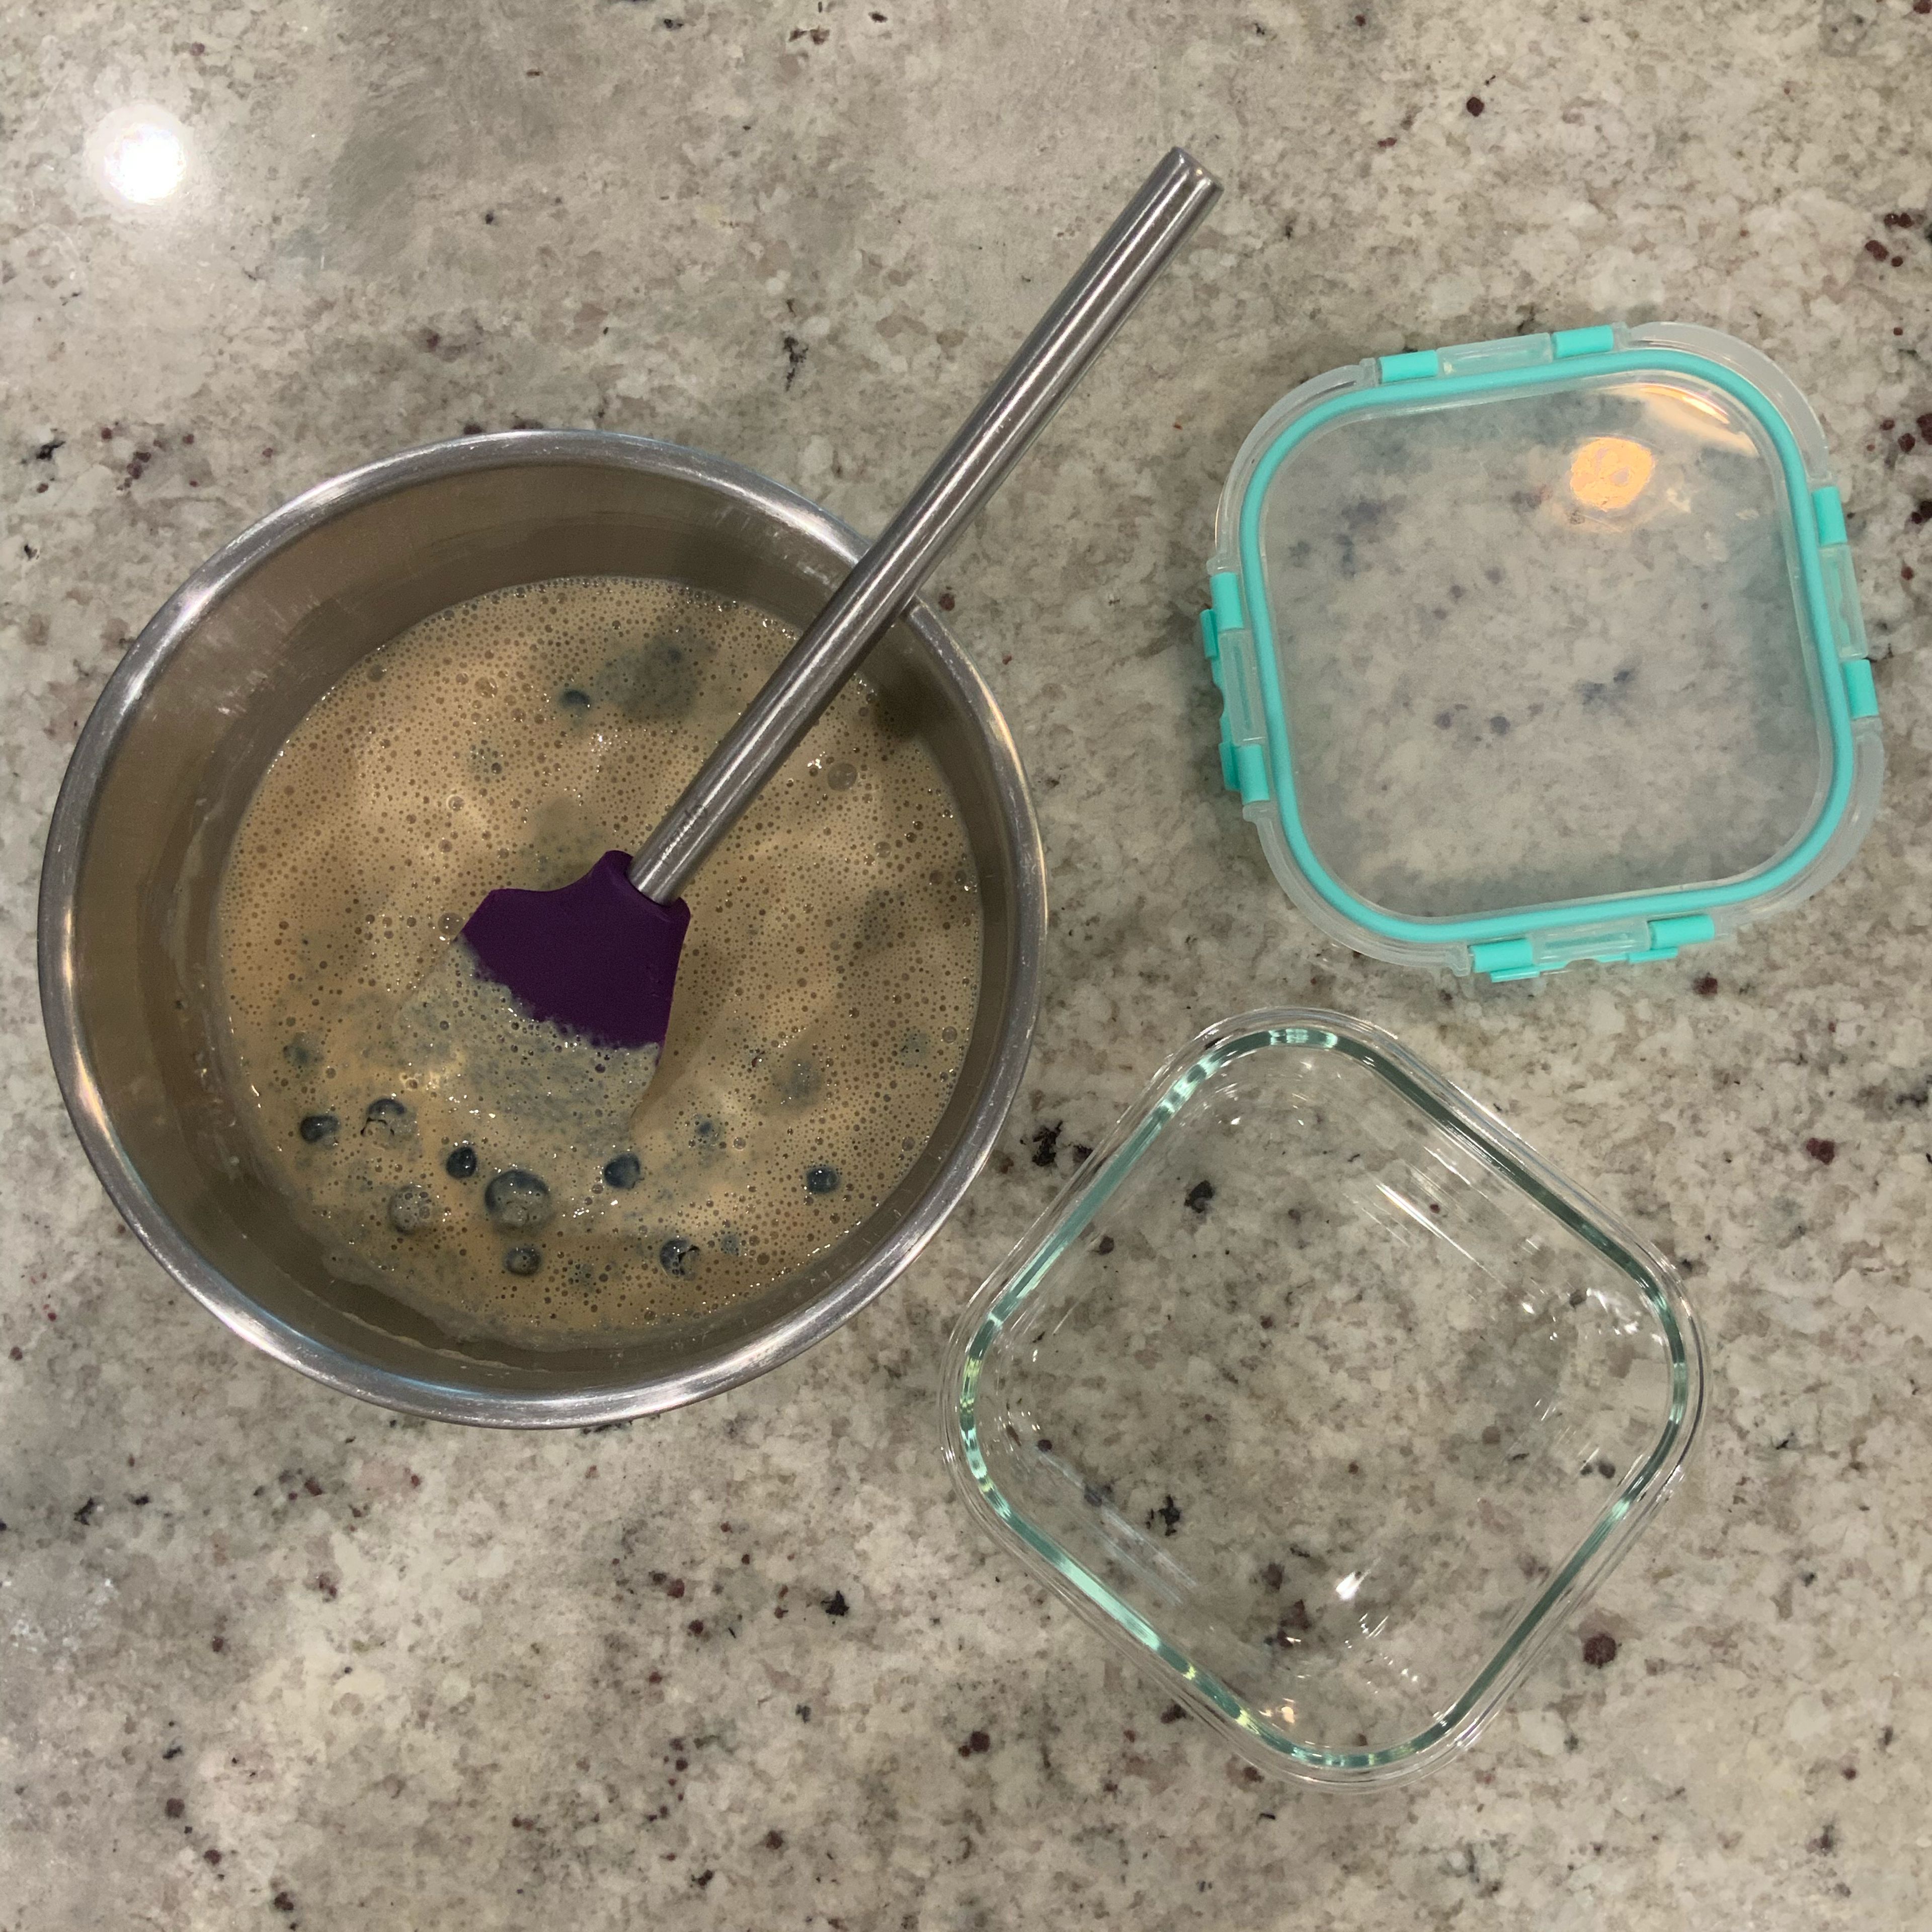 Use a spatula to mix in the whole blueberries, then transfer the mixture to an airtight container for storage in the fridge.